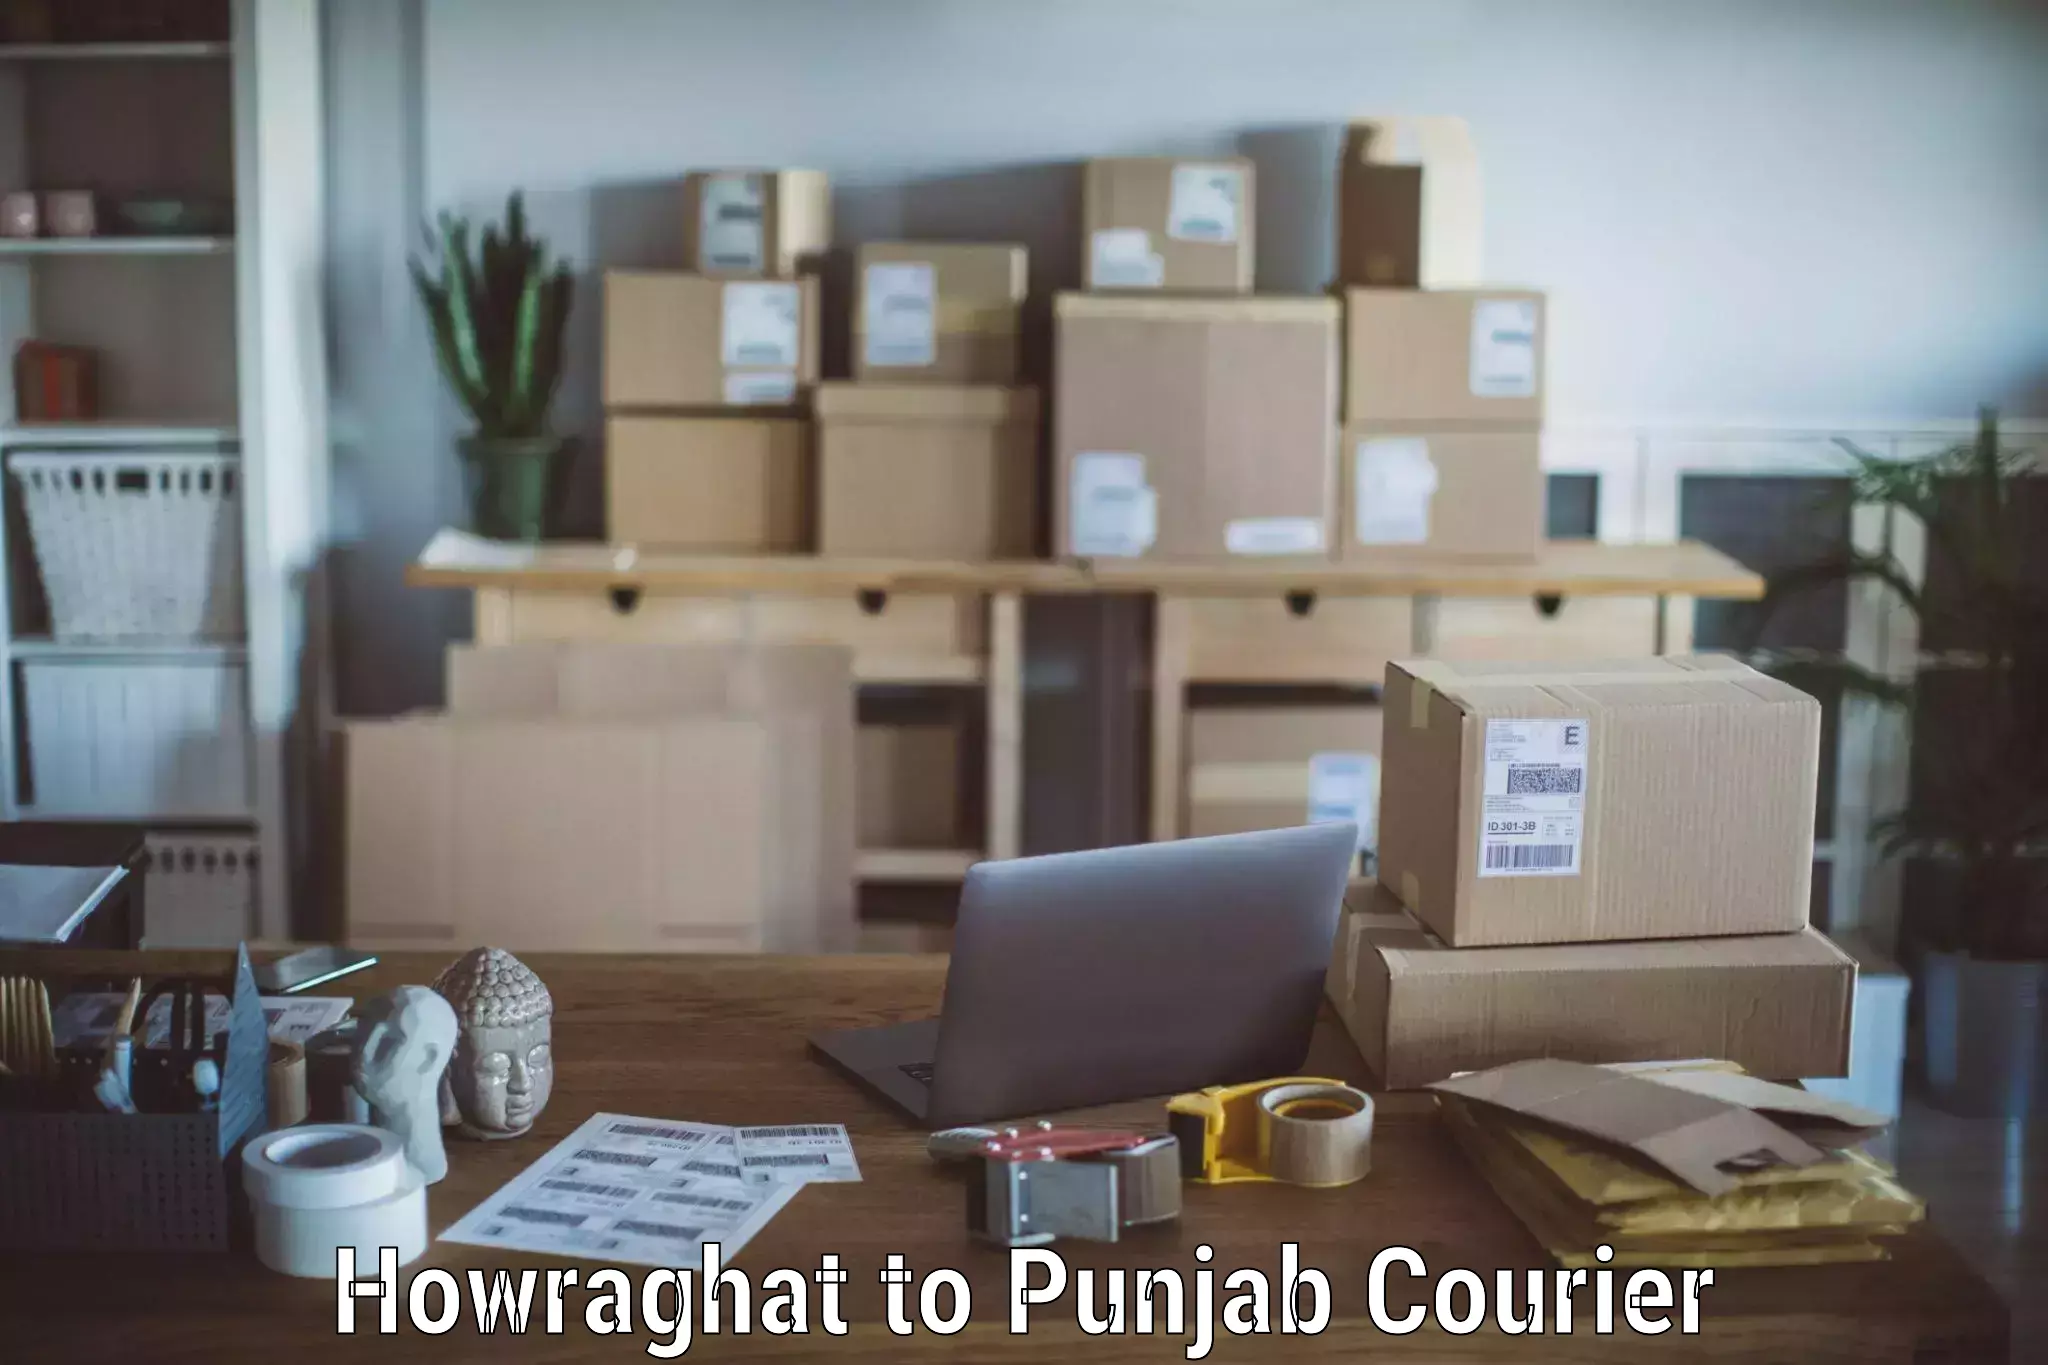 Specialized moving company Howraghat to Mansa